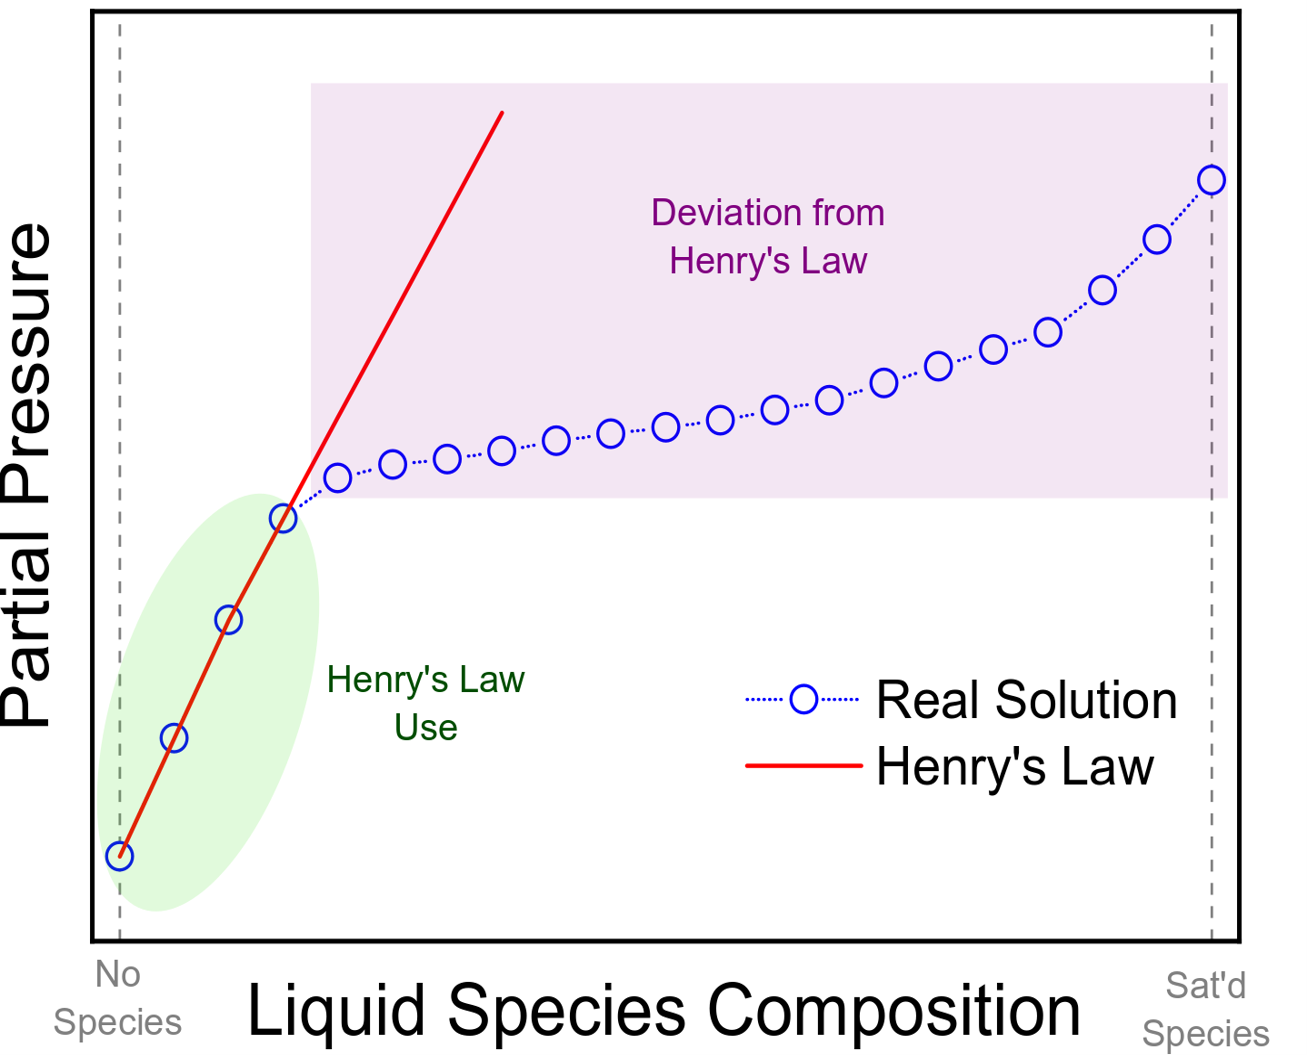 Henry's Law use at low solution composition. At higher concentrations, Henry's Law is not a valid assumption.